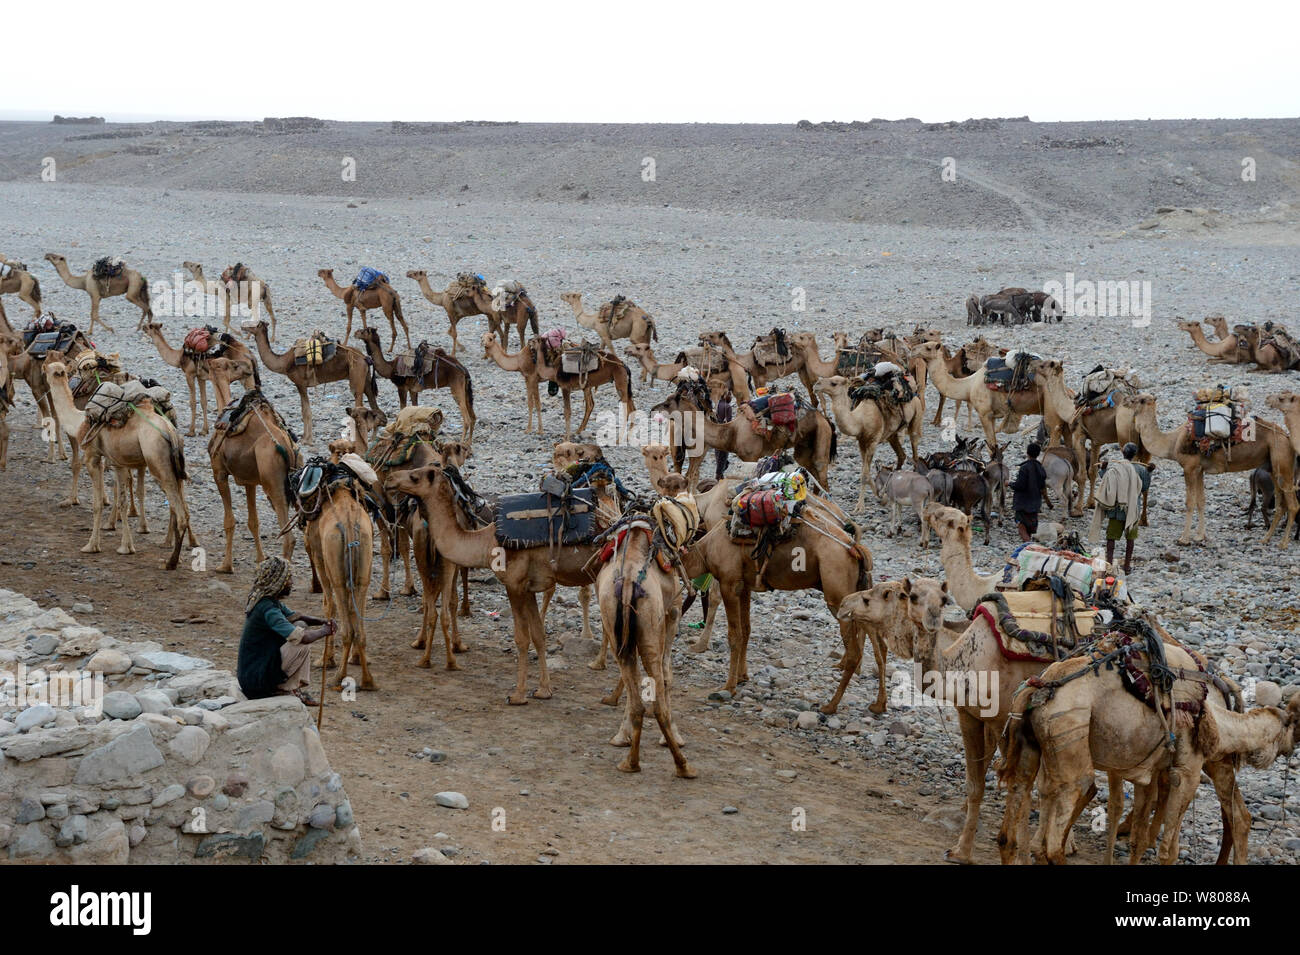 Early morning at Ahmed Ela, with caravan of Dromedary camels (Camelus dromedarius) and their pullers going to pick up salt at Lake Assale, Danakil Depression, Afar region, Ethiopia, March 2015. Stock Photo